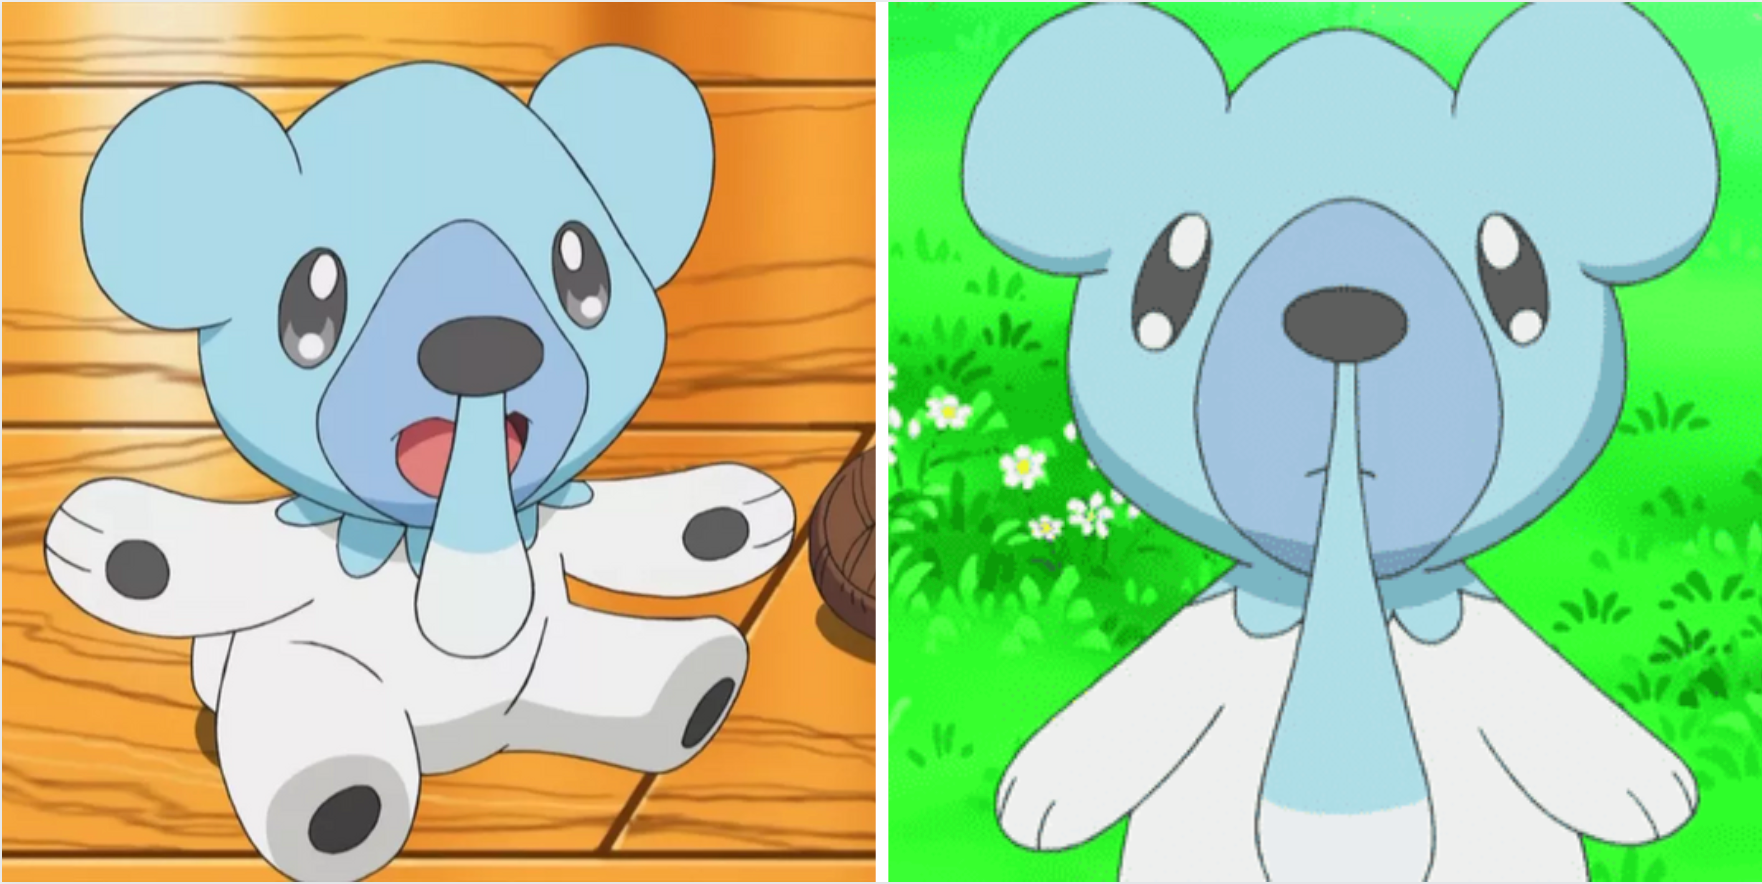 Cubchoo from the Pokemon Anime